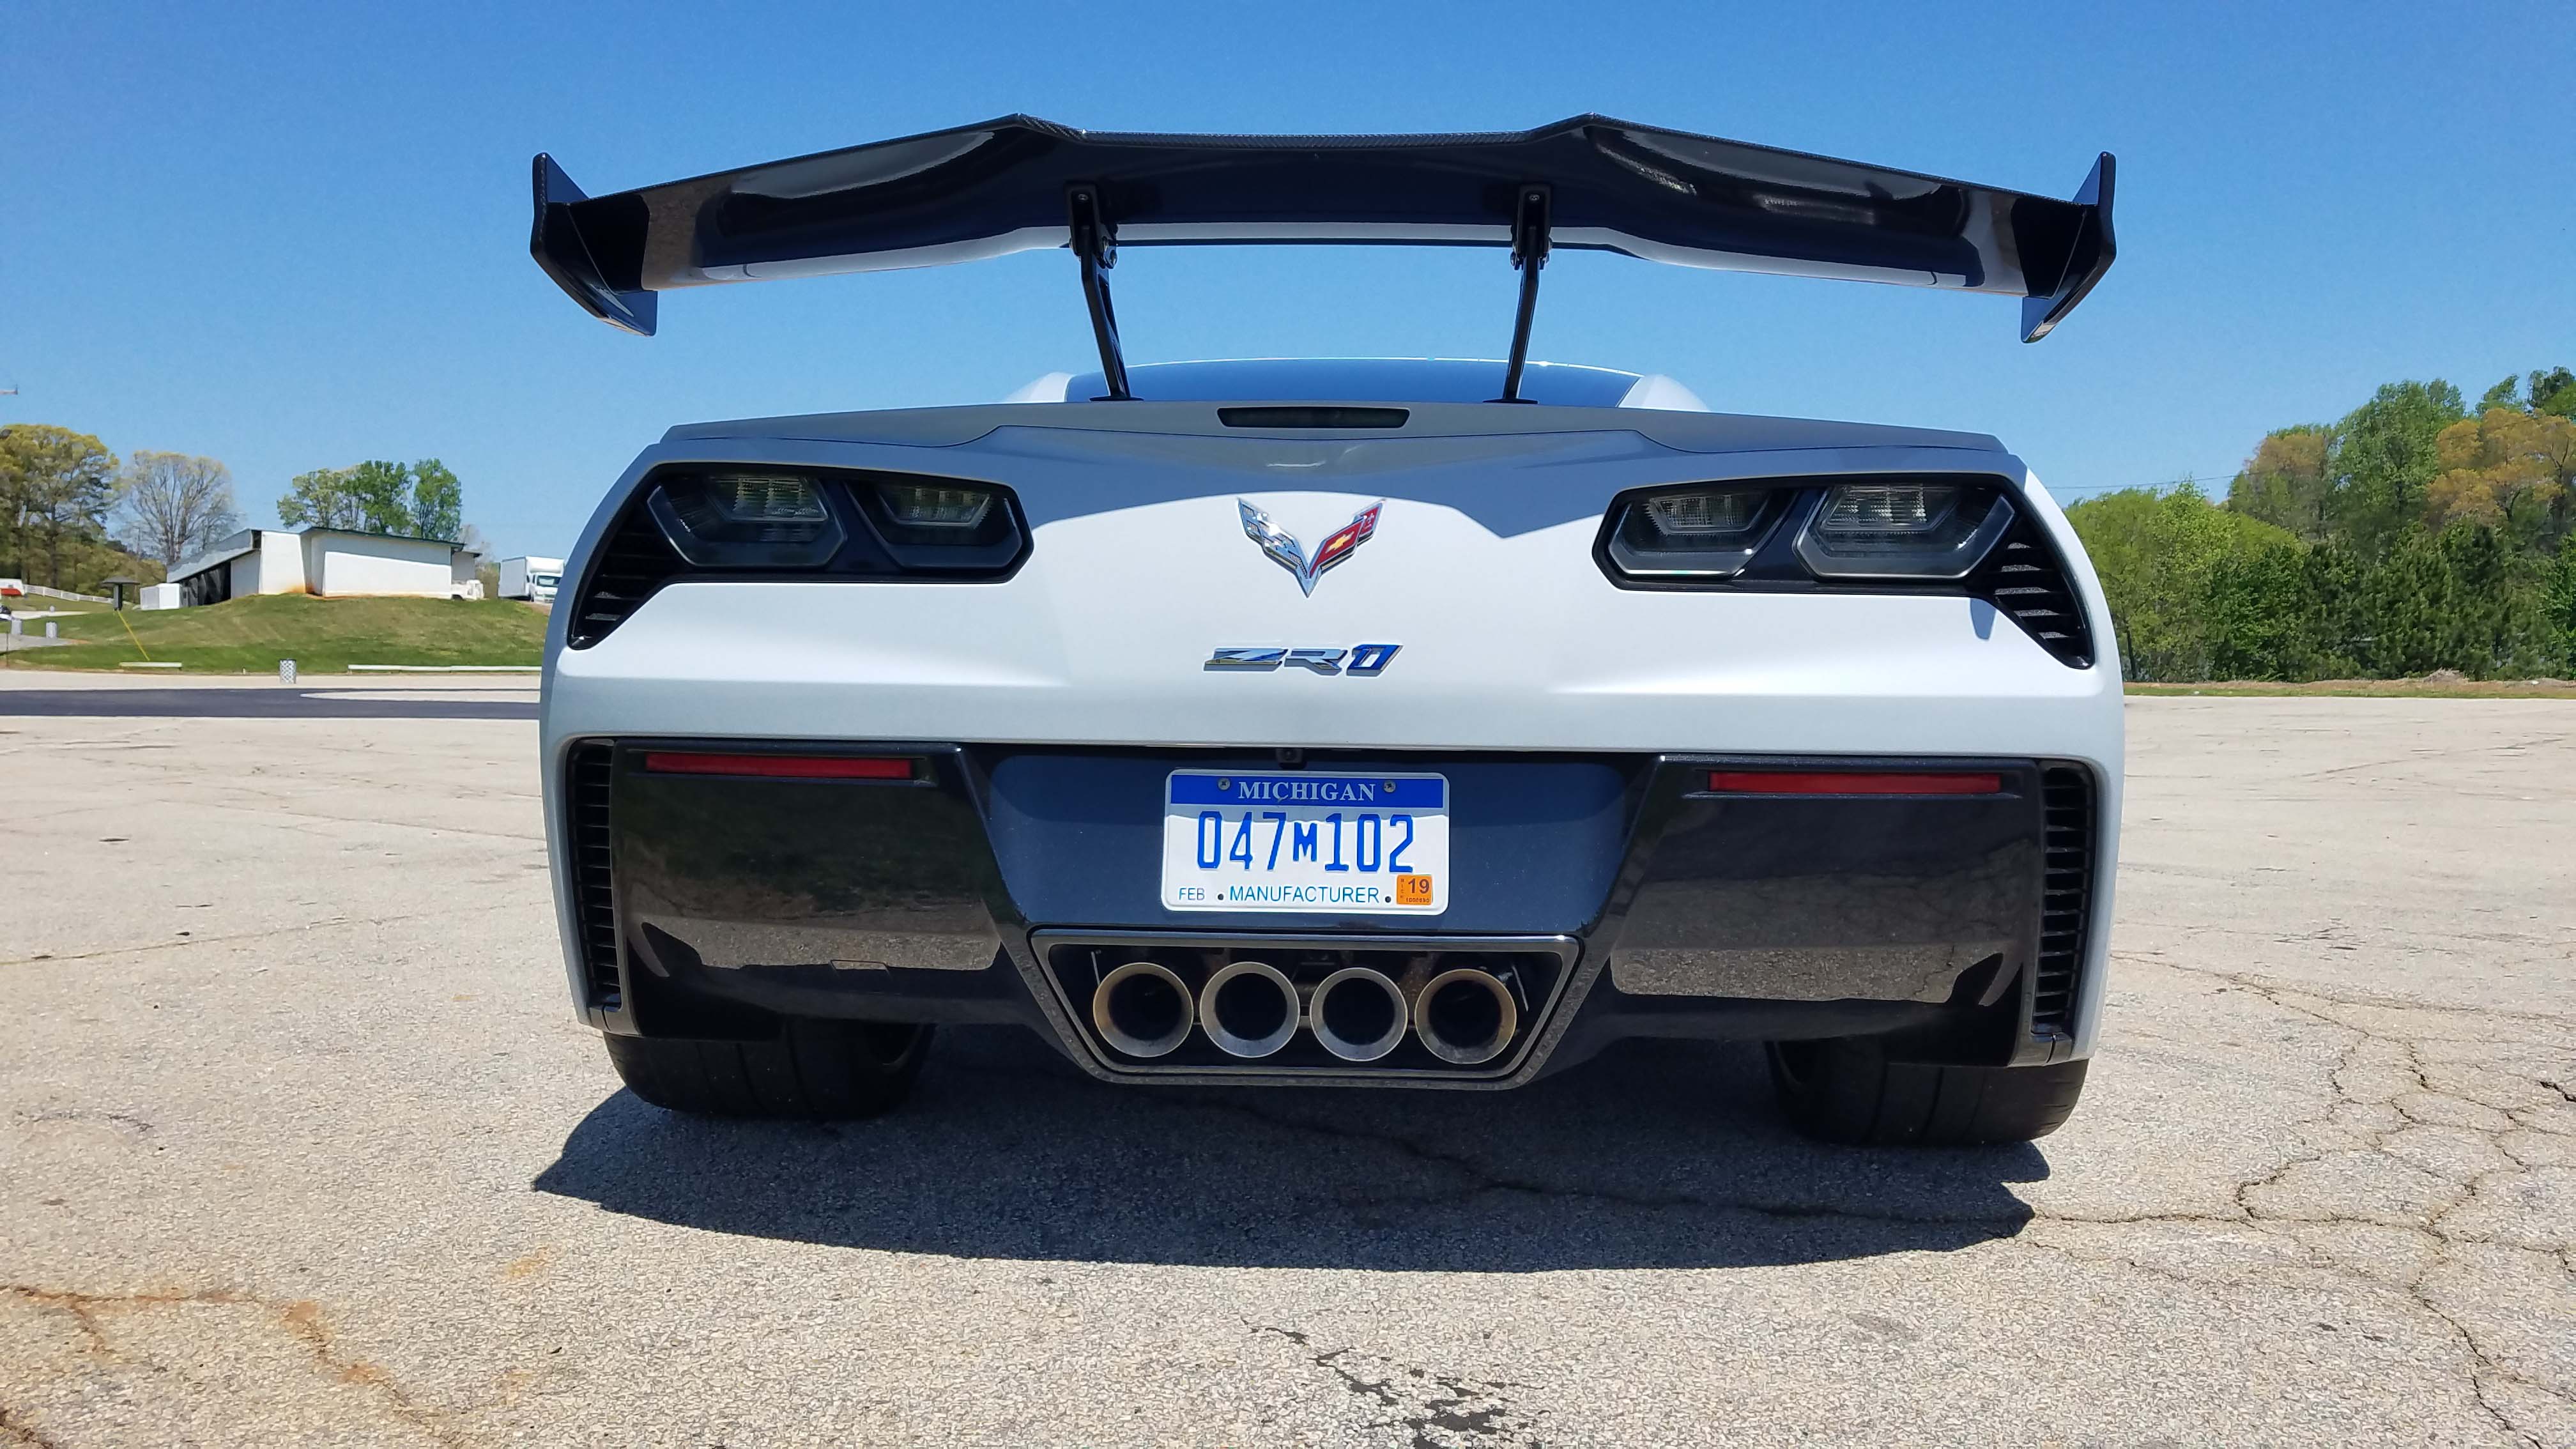 The optional high wing on the Corvette ZR1 helps produce nearly 1,000 pounds of downforce for better stick.